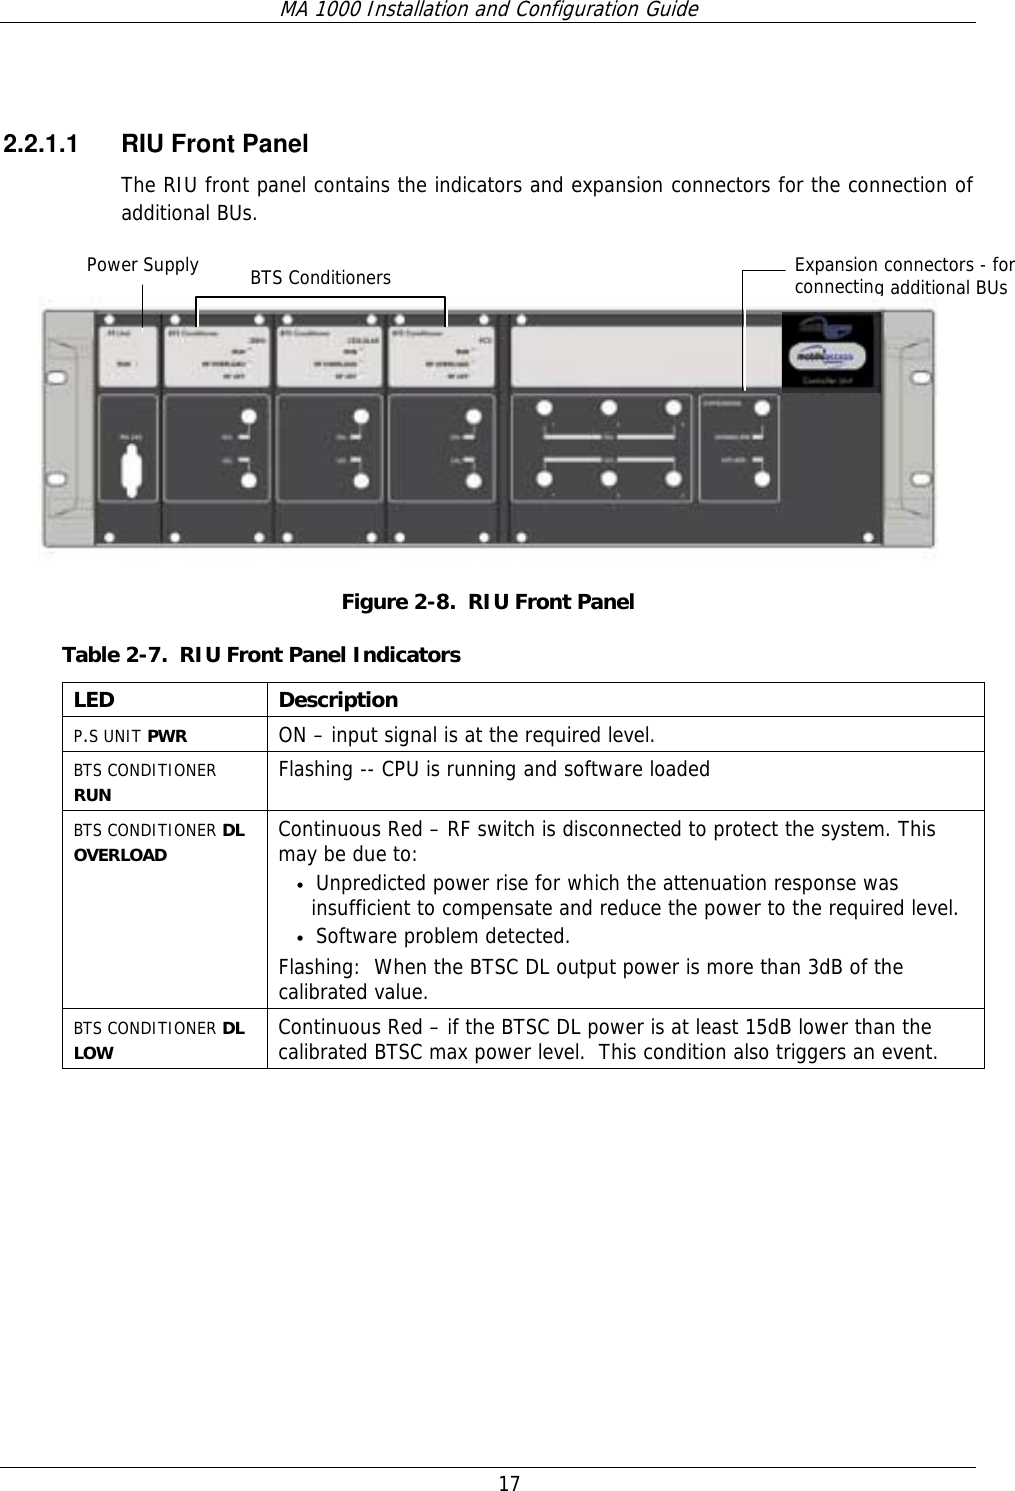 MA 1000 Installation and Configuration Guide  17  2.2.1.1  RIU Front Panel The RIU front panel contains the indicators and expansion connectors for the connection of additional BUs.      Figure  2-8.  RIU Front Panel Table  2-7.  RIU Front Panel Indicators LED Description P.S UNIT PWR  ON – input signal is at the required level. BTS CONDITIONER RUN Flashing -- CPU is running and software loaded BTS CONDITIONER DL OVERLOAD Continuous Red – RF switch is disconnected to protect the system. This may be due to:  • Unpredicted power rise for which the attenuation response was insufficient to compensate and reduce the power to the required level.   • Software problem detected. Flashing:  When the BTSC DL output power is more than 3dB of the calibrated value. BTS CONDITIONER DL LOW Continuous Red – if the BTSC DL power is at least 15dB lower than the calibrated BTSC max power level.  This condition also triggers an event.  Power SupplyBTS Conditioners Expansion connectors - for connecting additional BUs